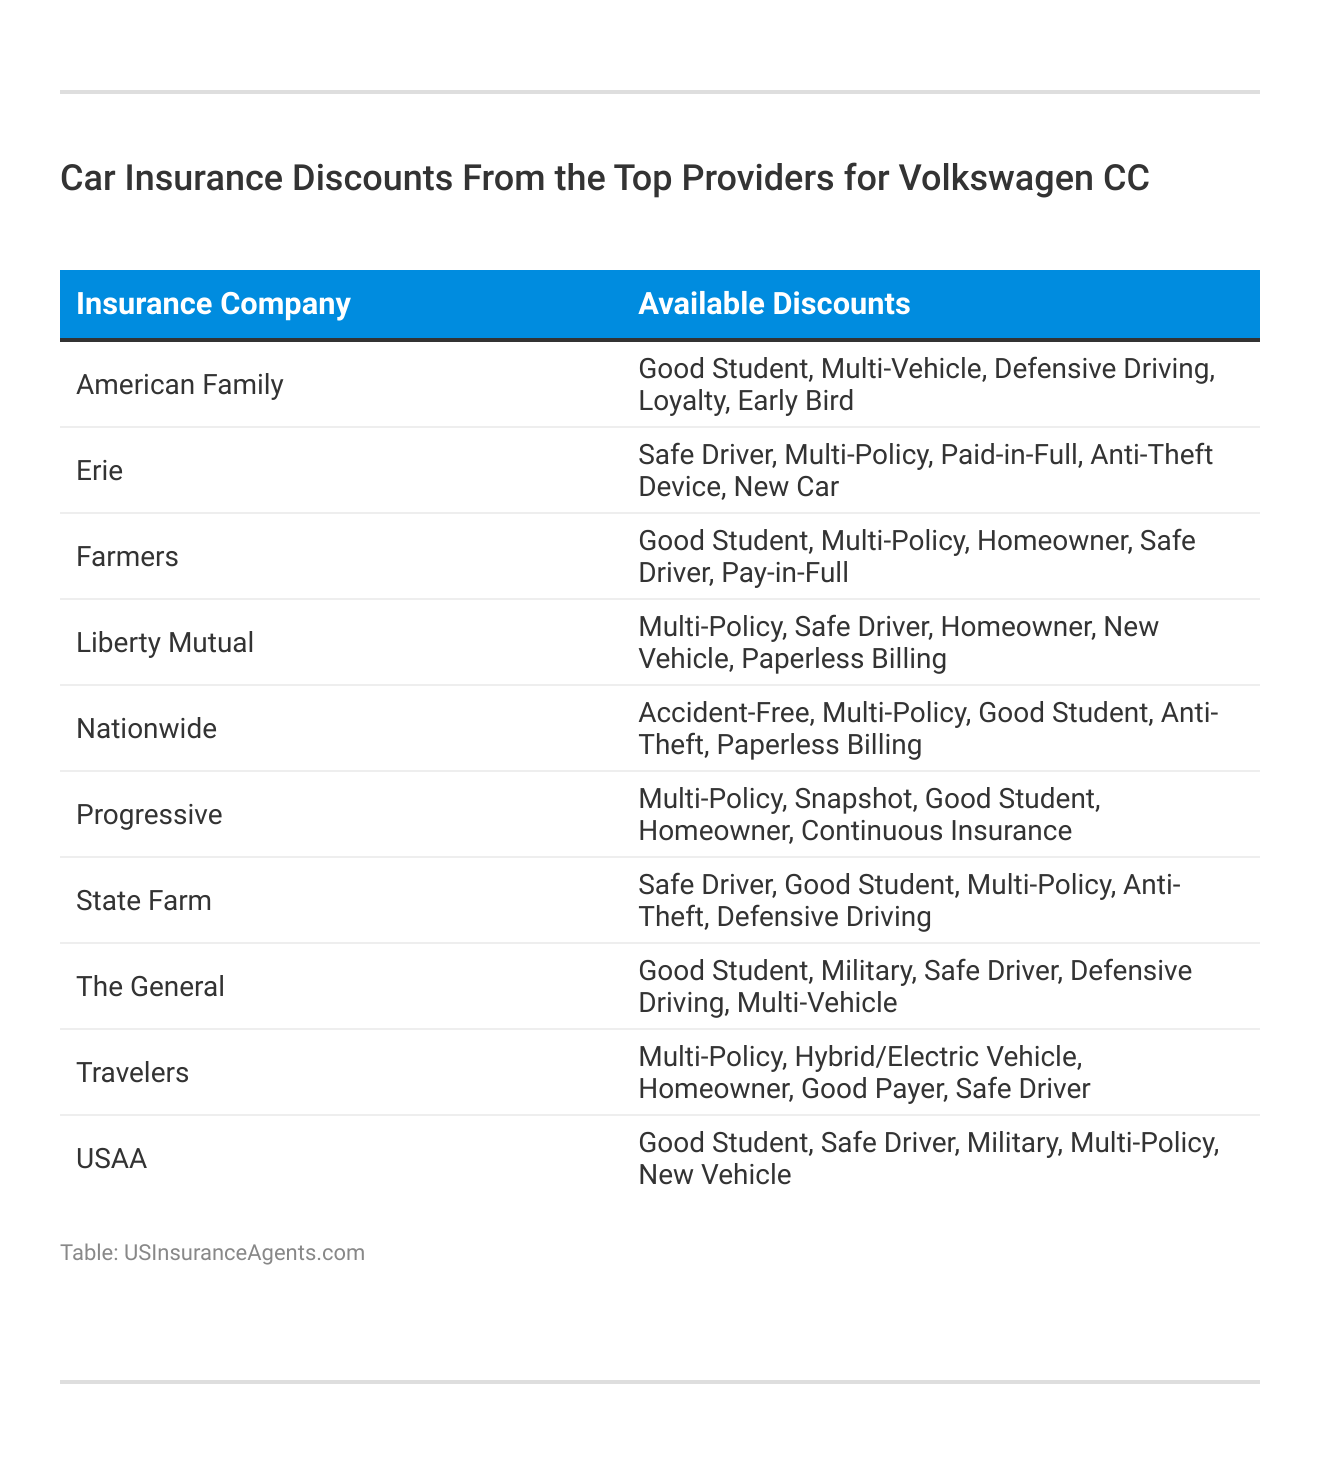 <h3>Car Insurance Discounts From the Top Providers for Volkswagen CC</h3>